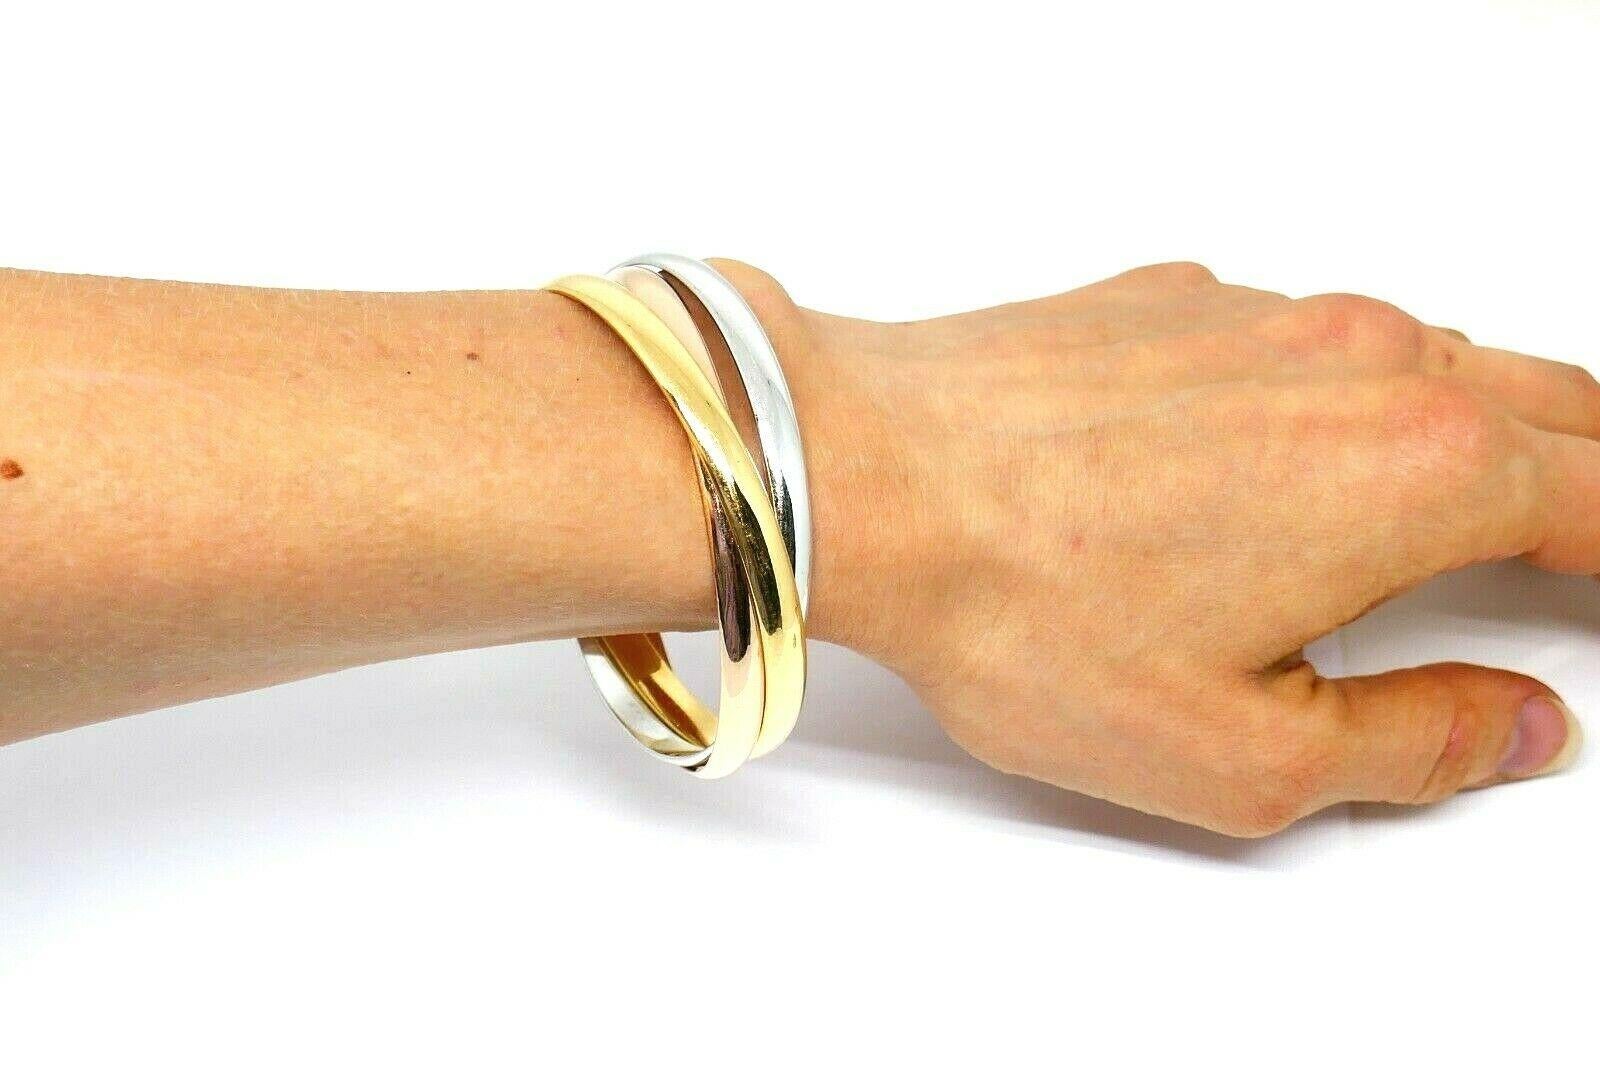 Iconic Cartier Trinity bangle bracelets made of 18k yellow, white and rose gold. Forever chic design with a great vintage touch.  
Measurements: inner circumference is 8